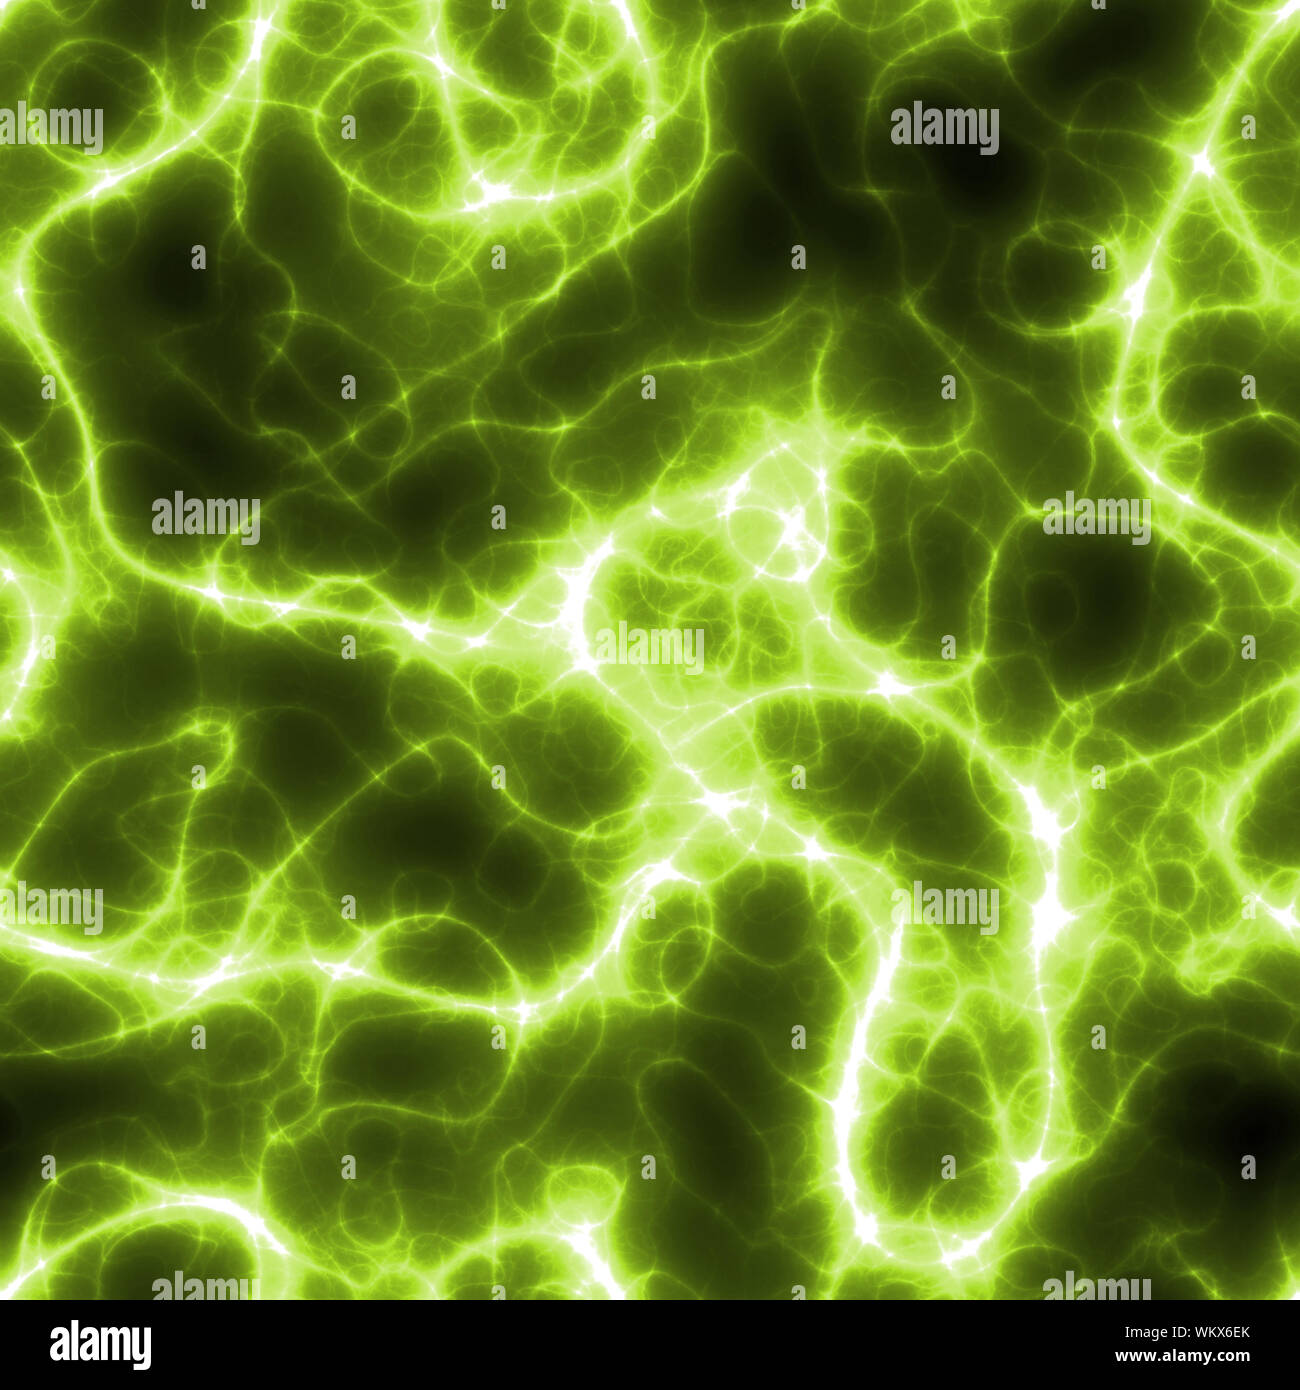 Seamless Electric Lightning Background in Green and Black Stock ...